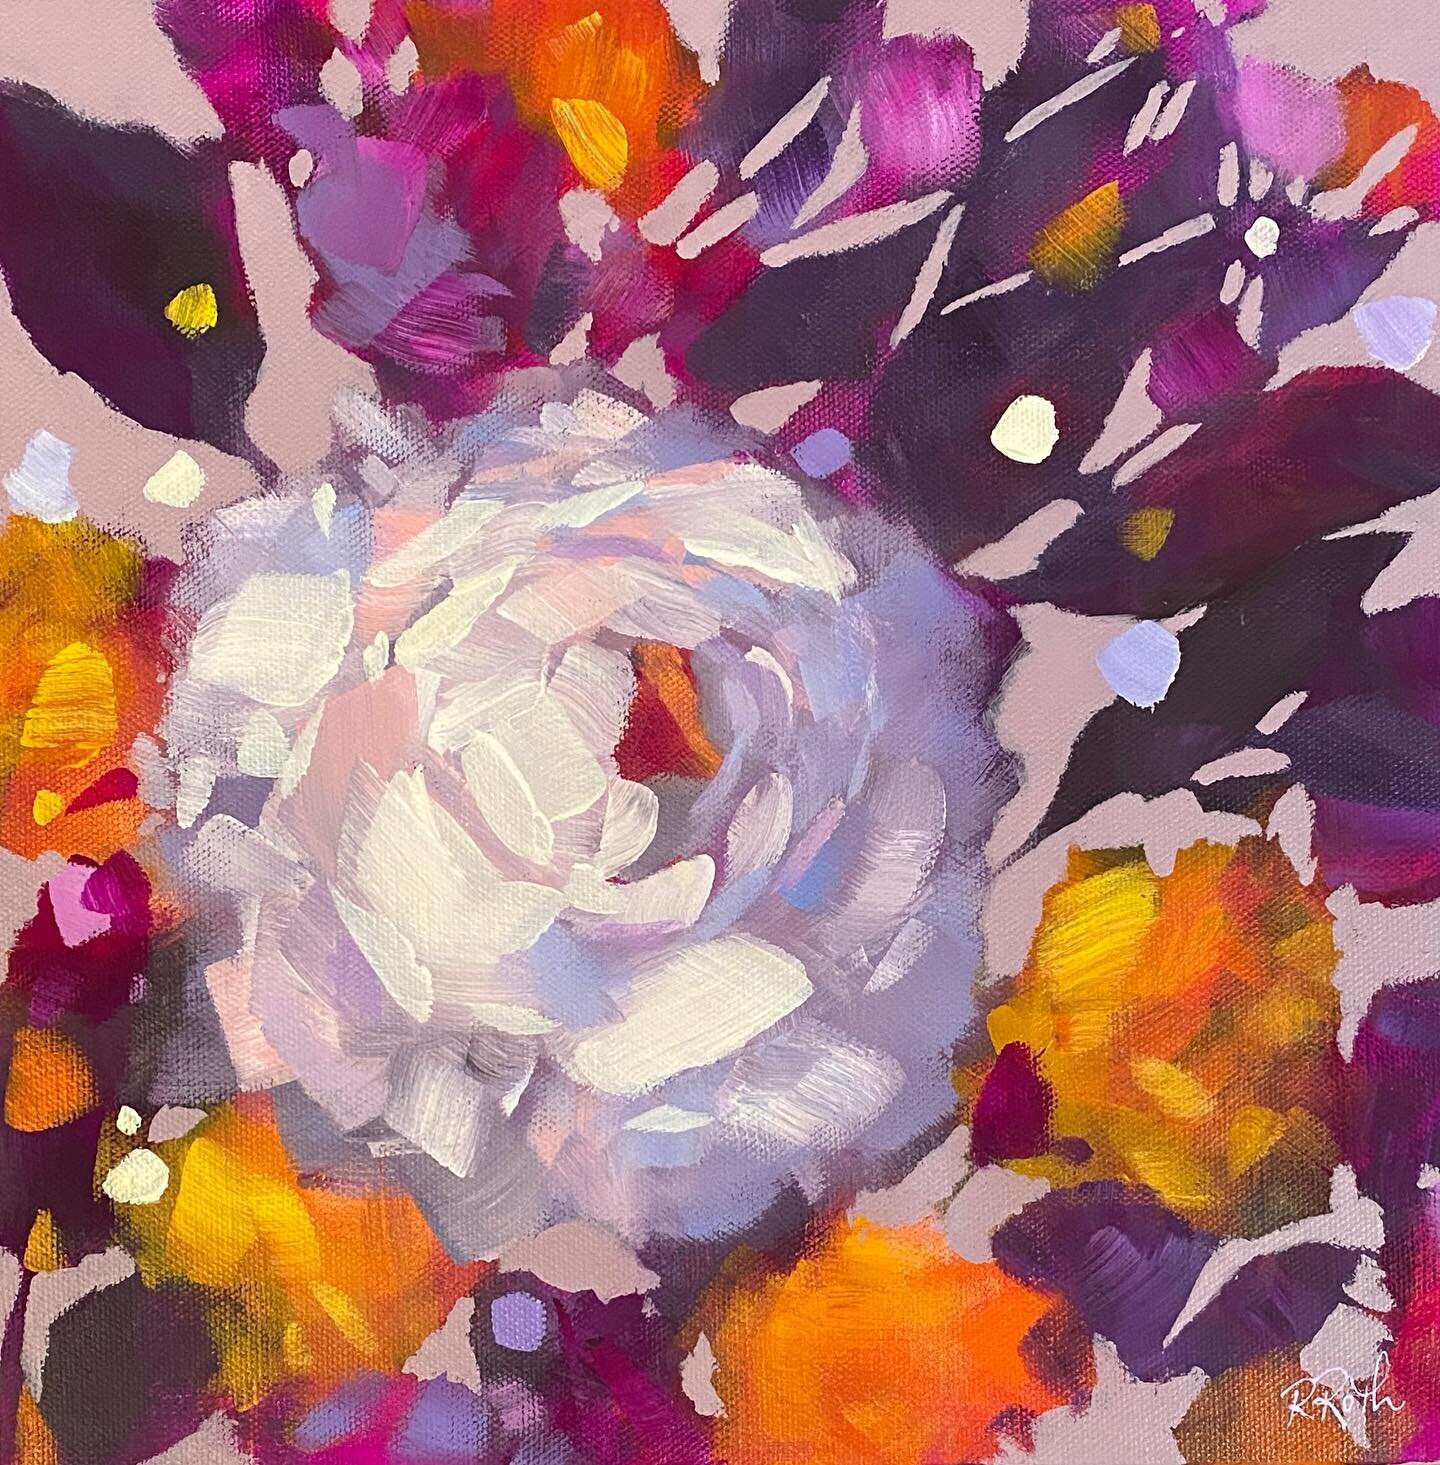 Liked this palette so much that I did a bigger version of a mini that I painted last week.  Maybe I should put this one into the @squarefootshow?  I gotta choose 4 more by the end of the week! 😊🌸

#squarefootshow #onlineartsales #abstractflowerart 